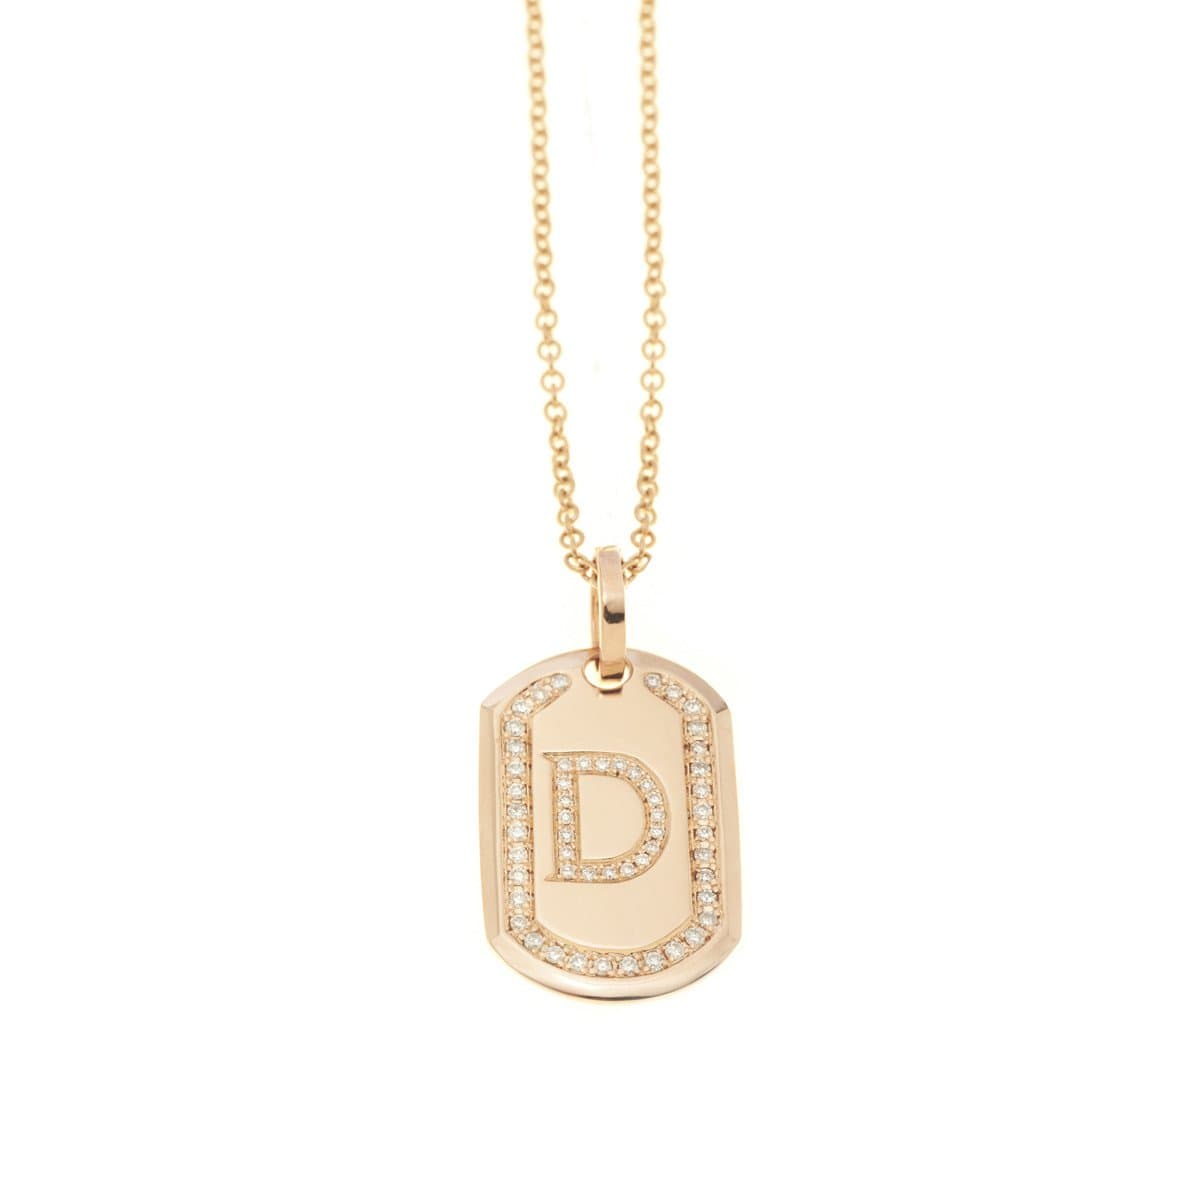 AIRE SMALL DIAMOND DOG TAG - Chris Aire Fine Jewelry & Timepieces